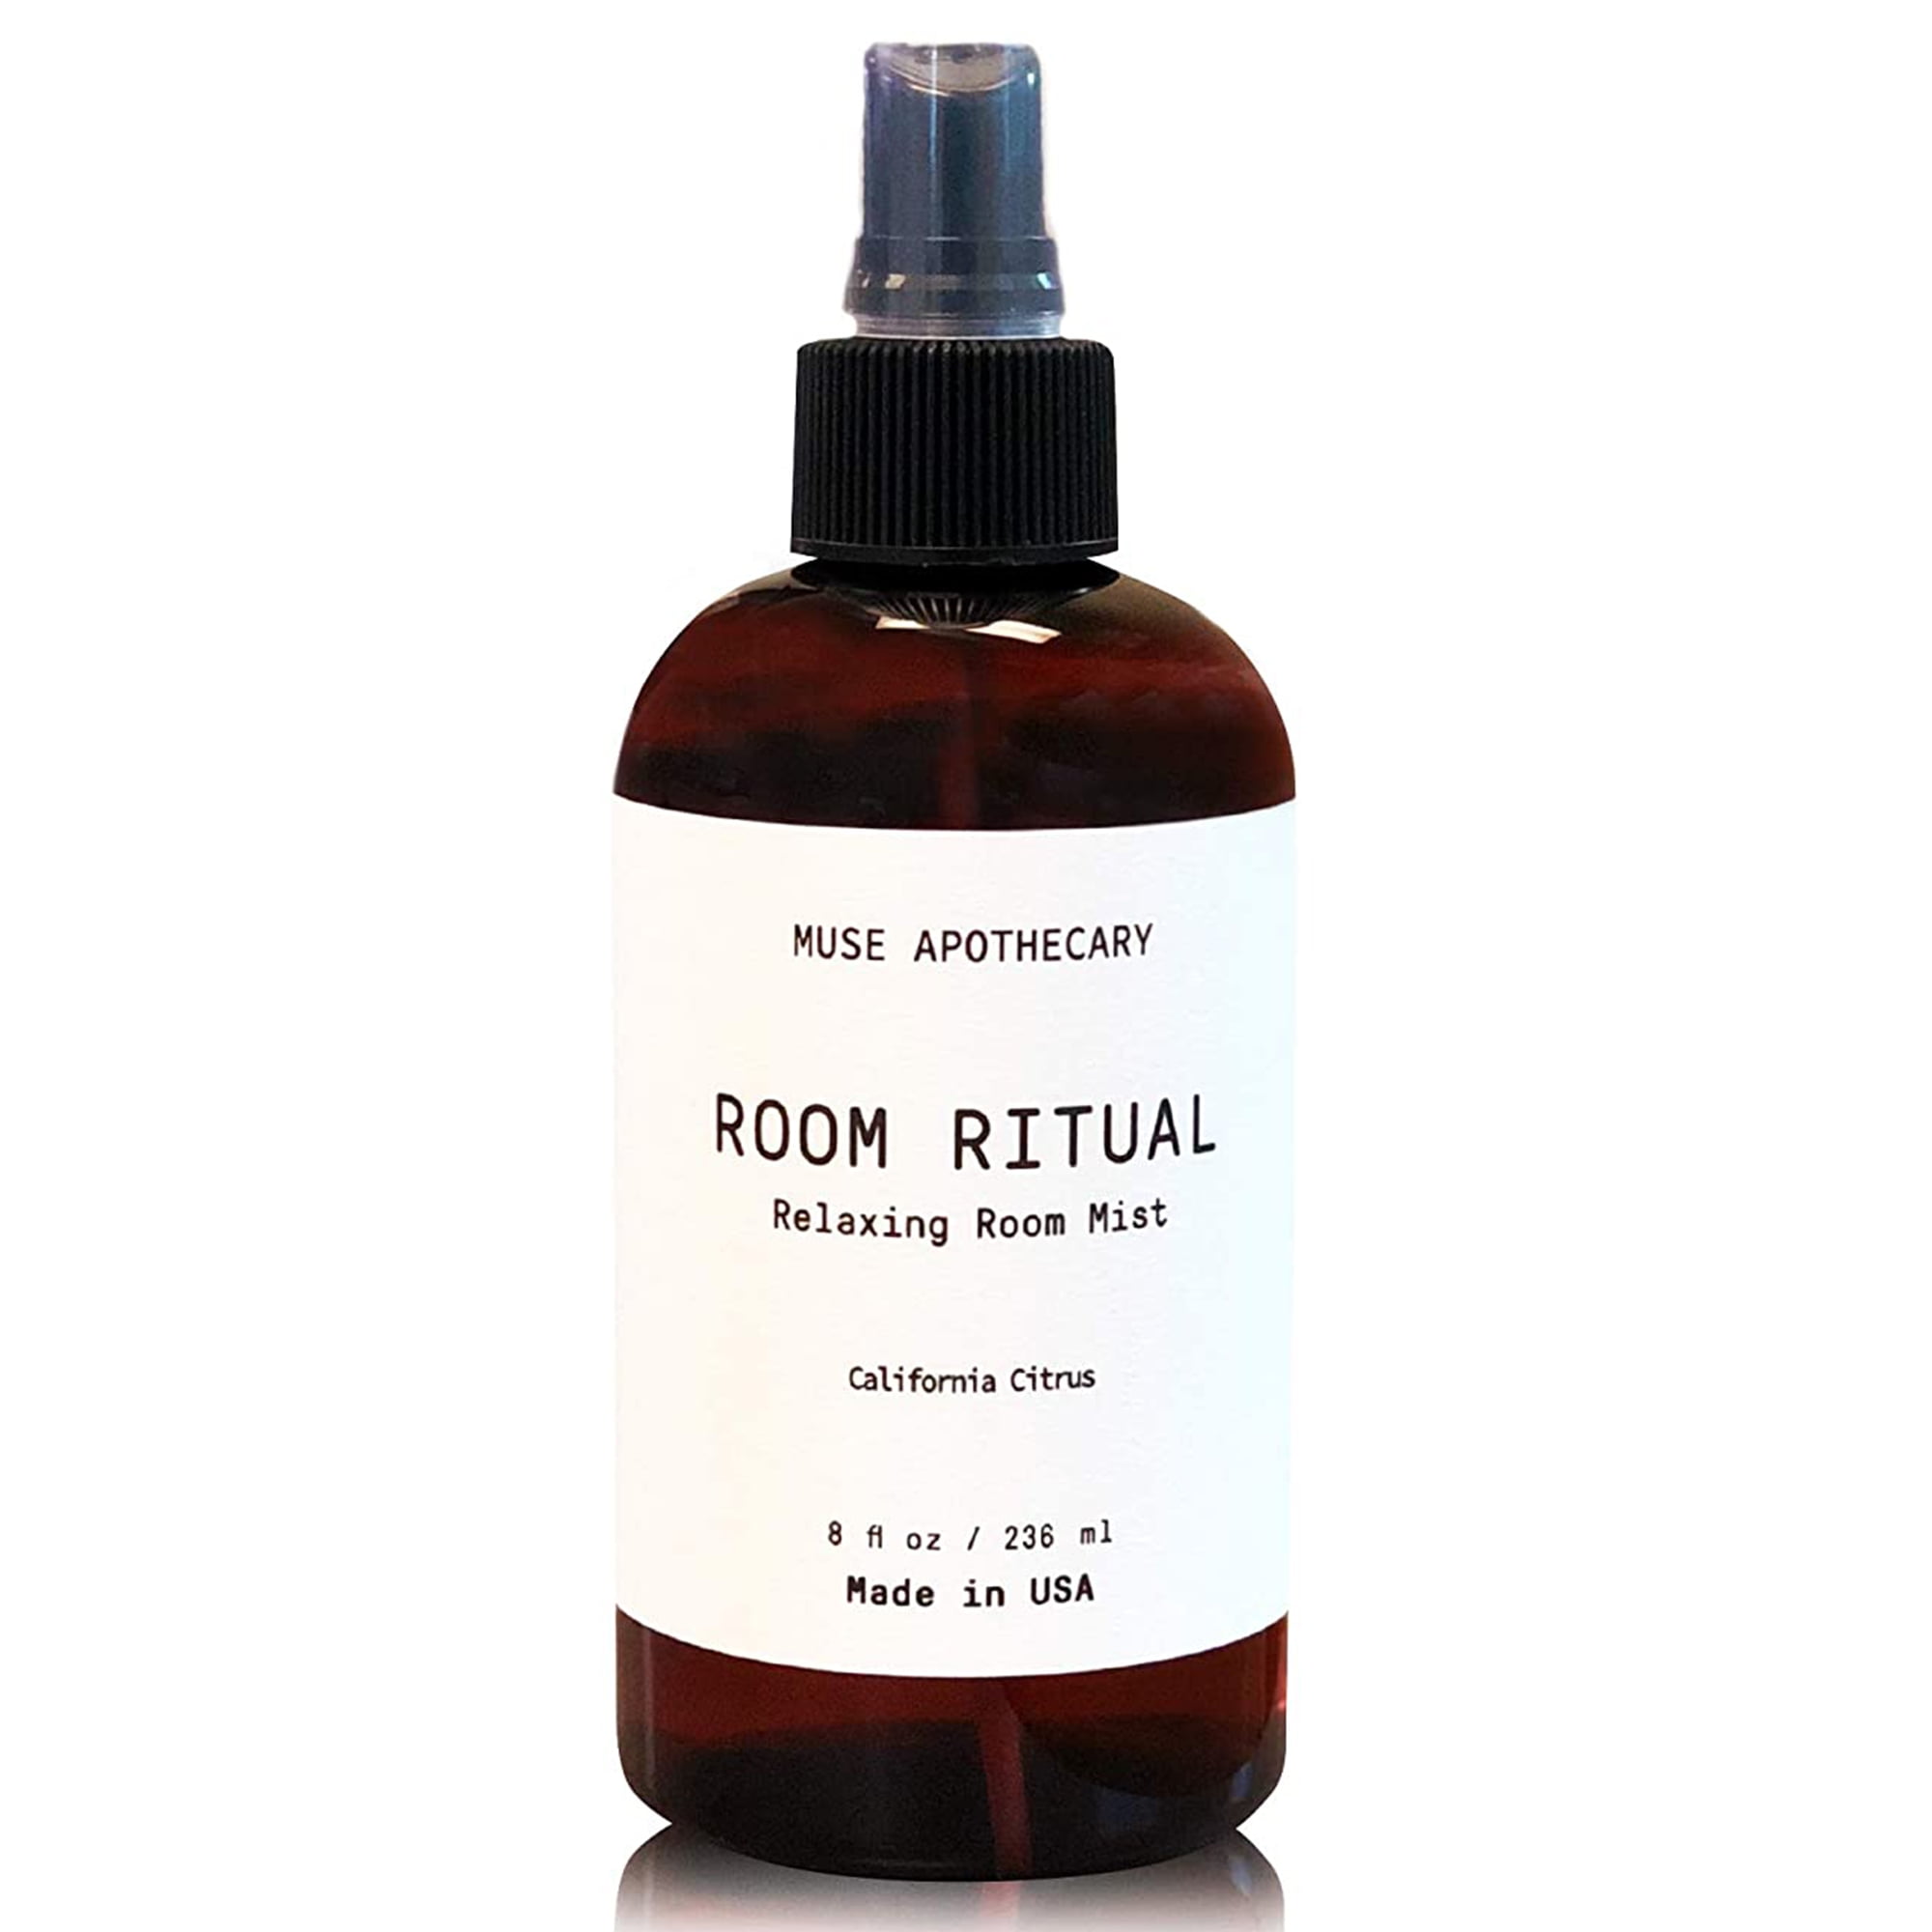 Muse Apothecary Room Ritual Luxury Aromatherapy Room Spray Air Freshener  with Essential Oils, California Citrus 8-Oz 2-Pack